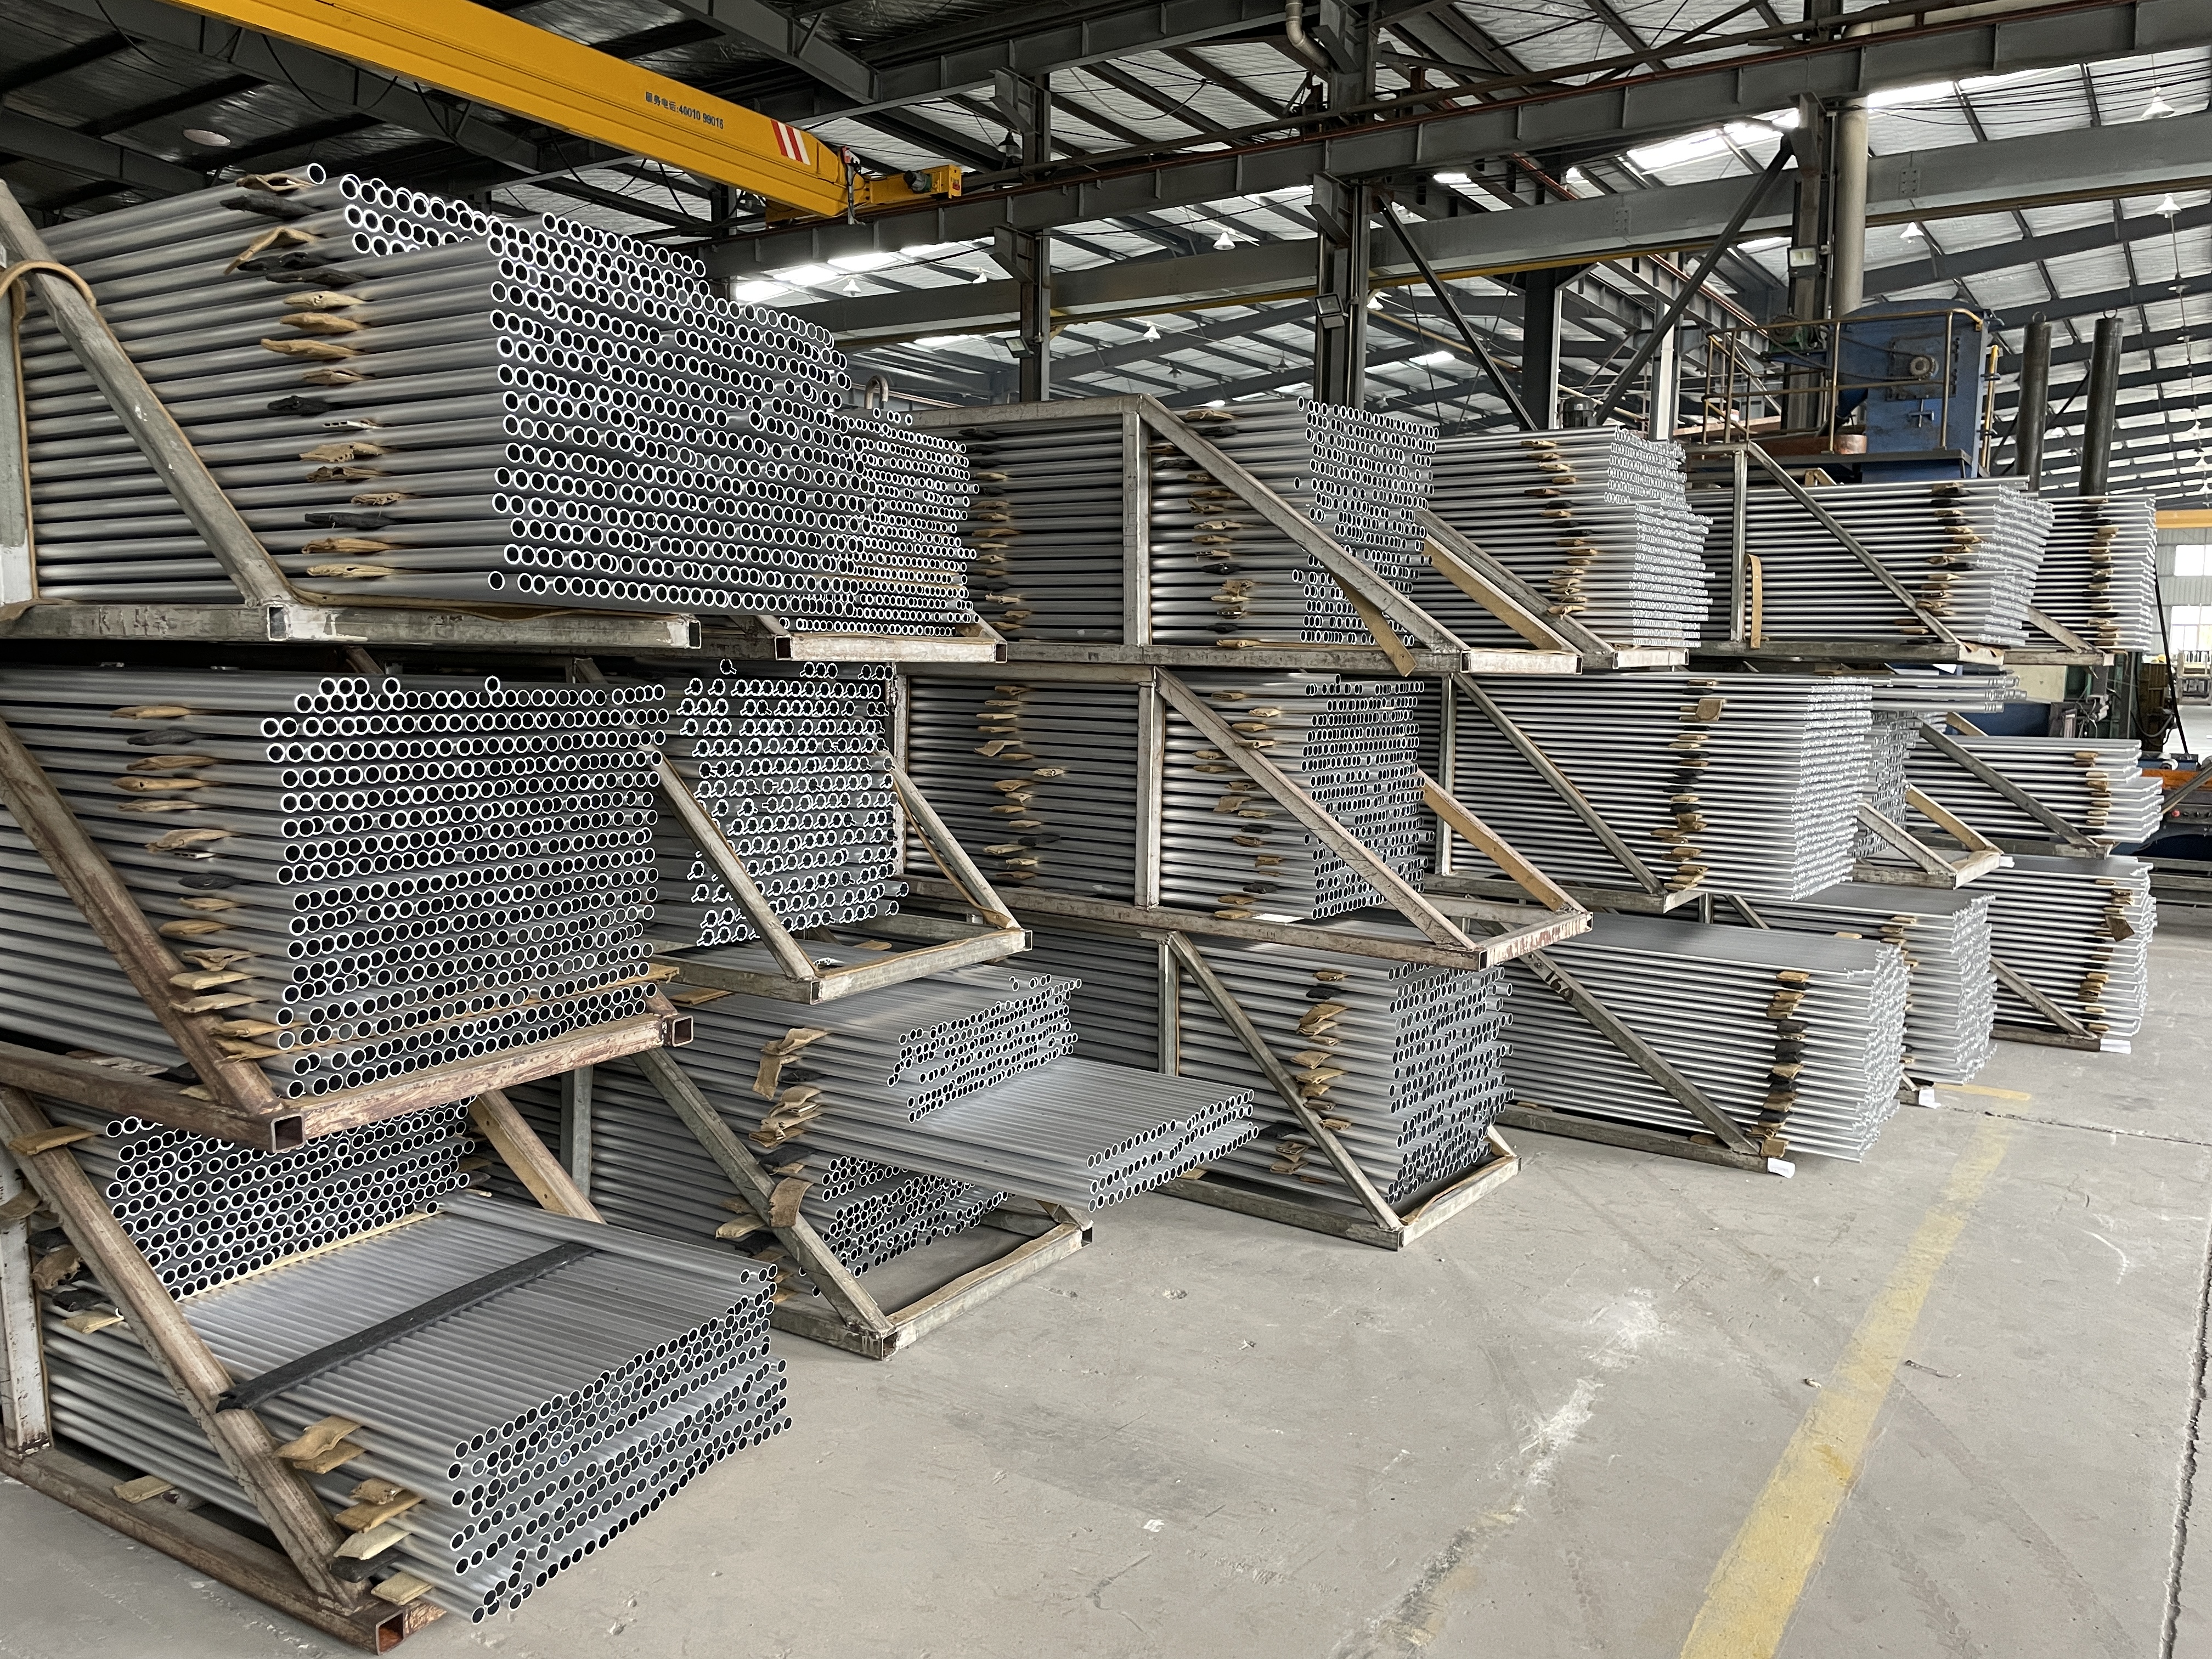 Short-term aluminum prices are expected to maintain the oscillating trend